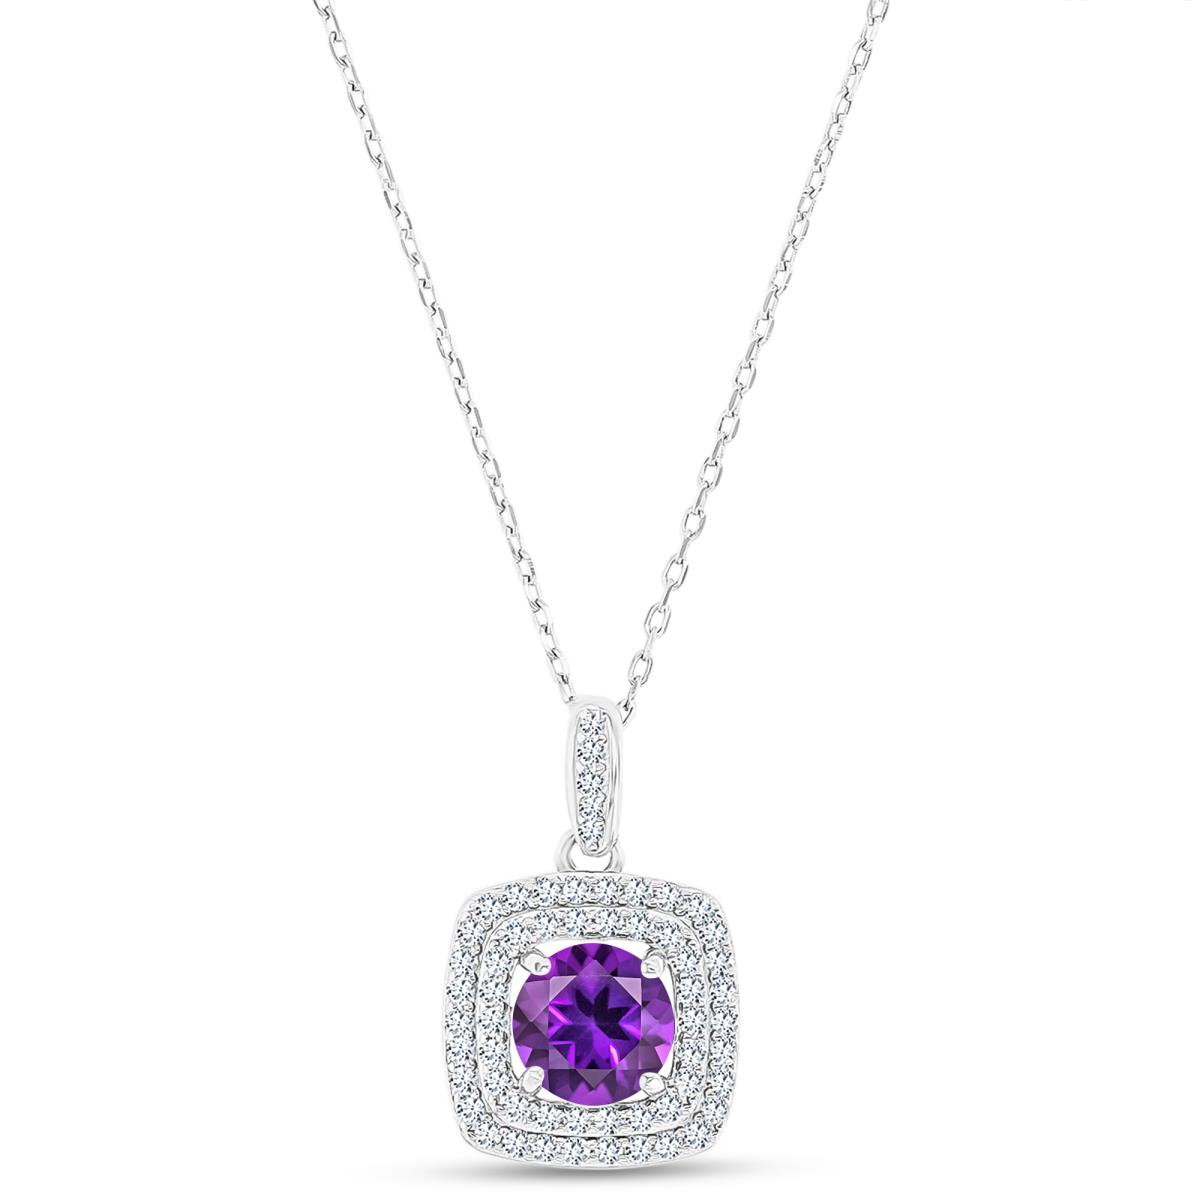 Sterling Silver Rhodium 7mm RD Amethyst/ Cr White Sapphire Cushion Double Halo 16"+2" Necklace